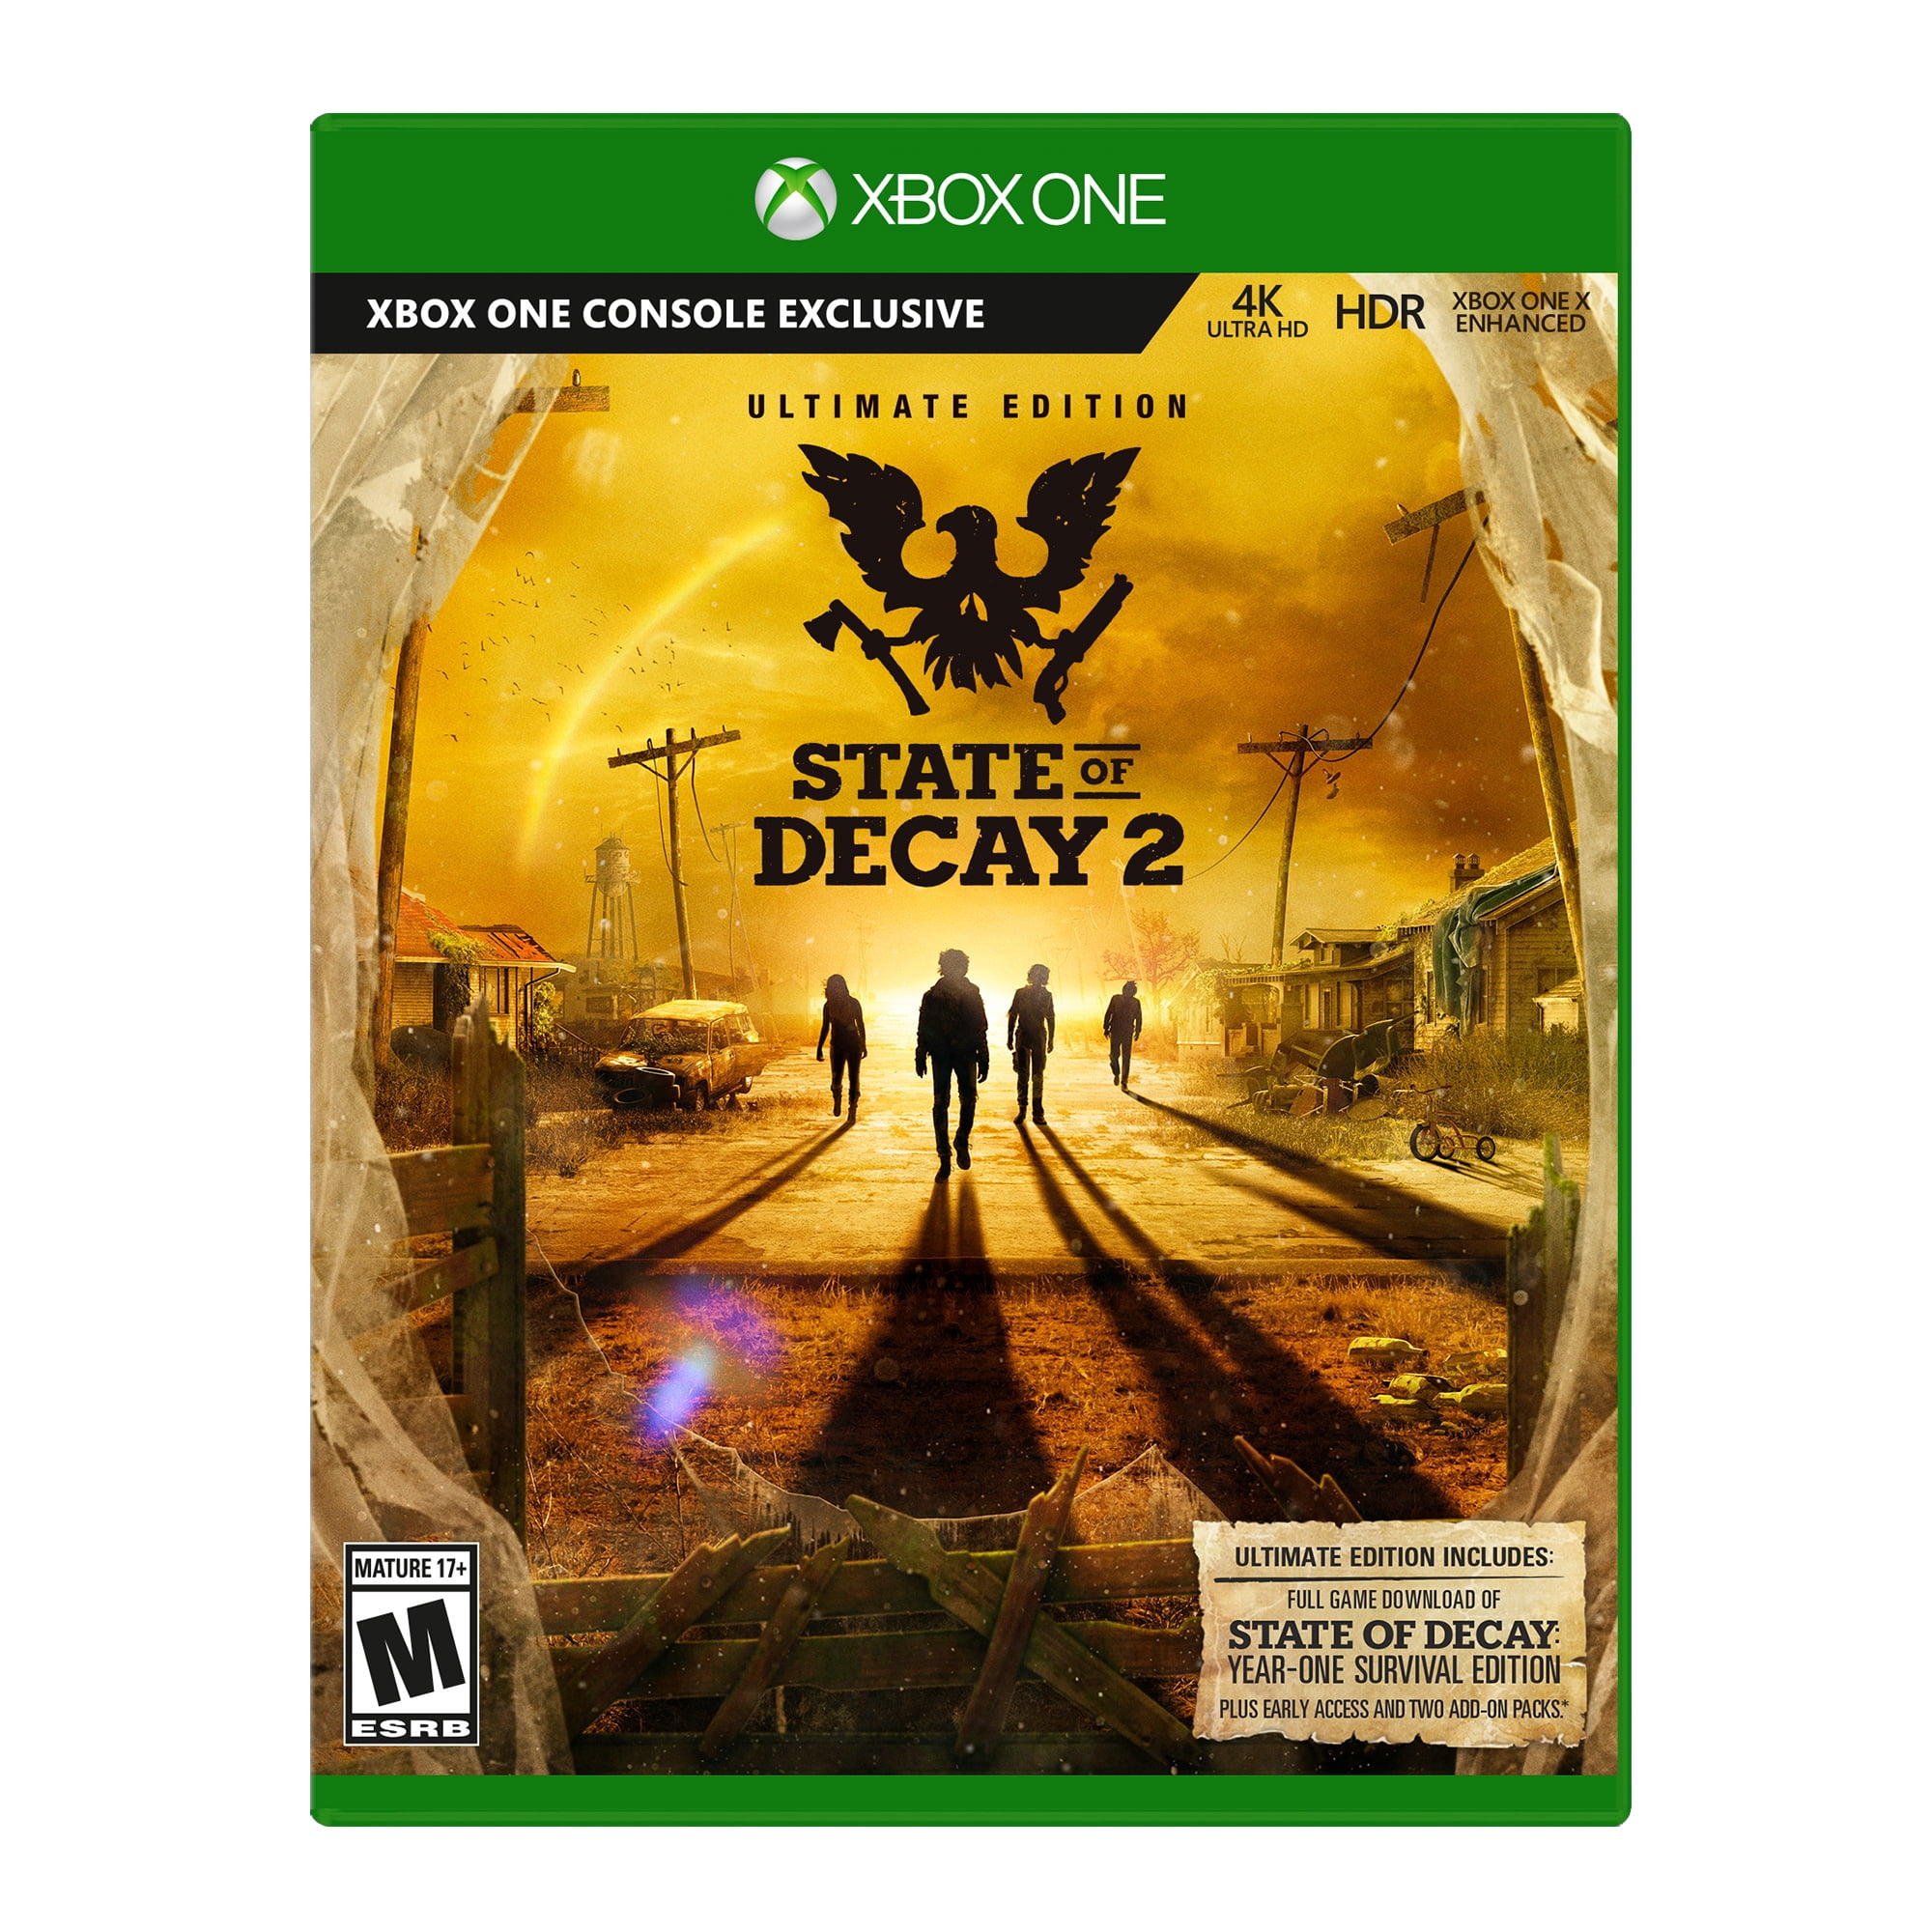 Microsoft will be making State of Decay 3, and it may even be the